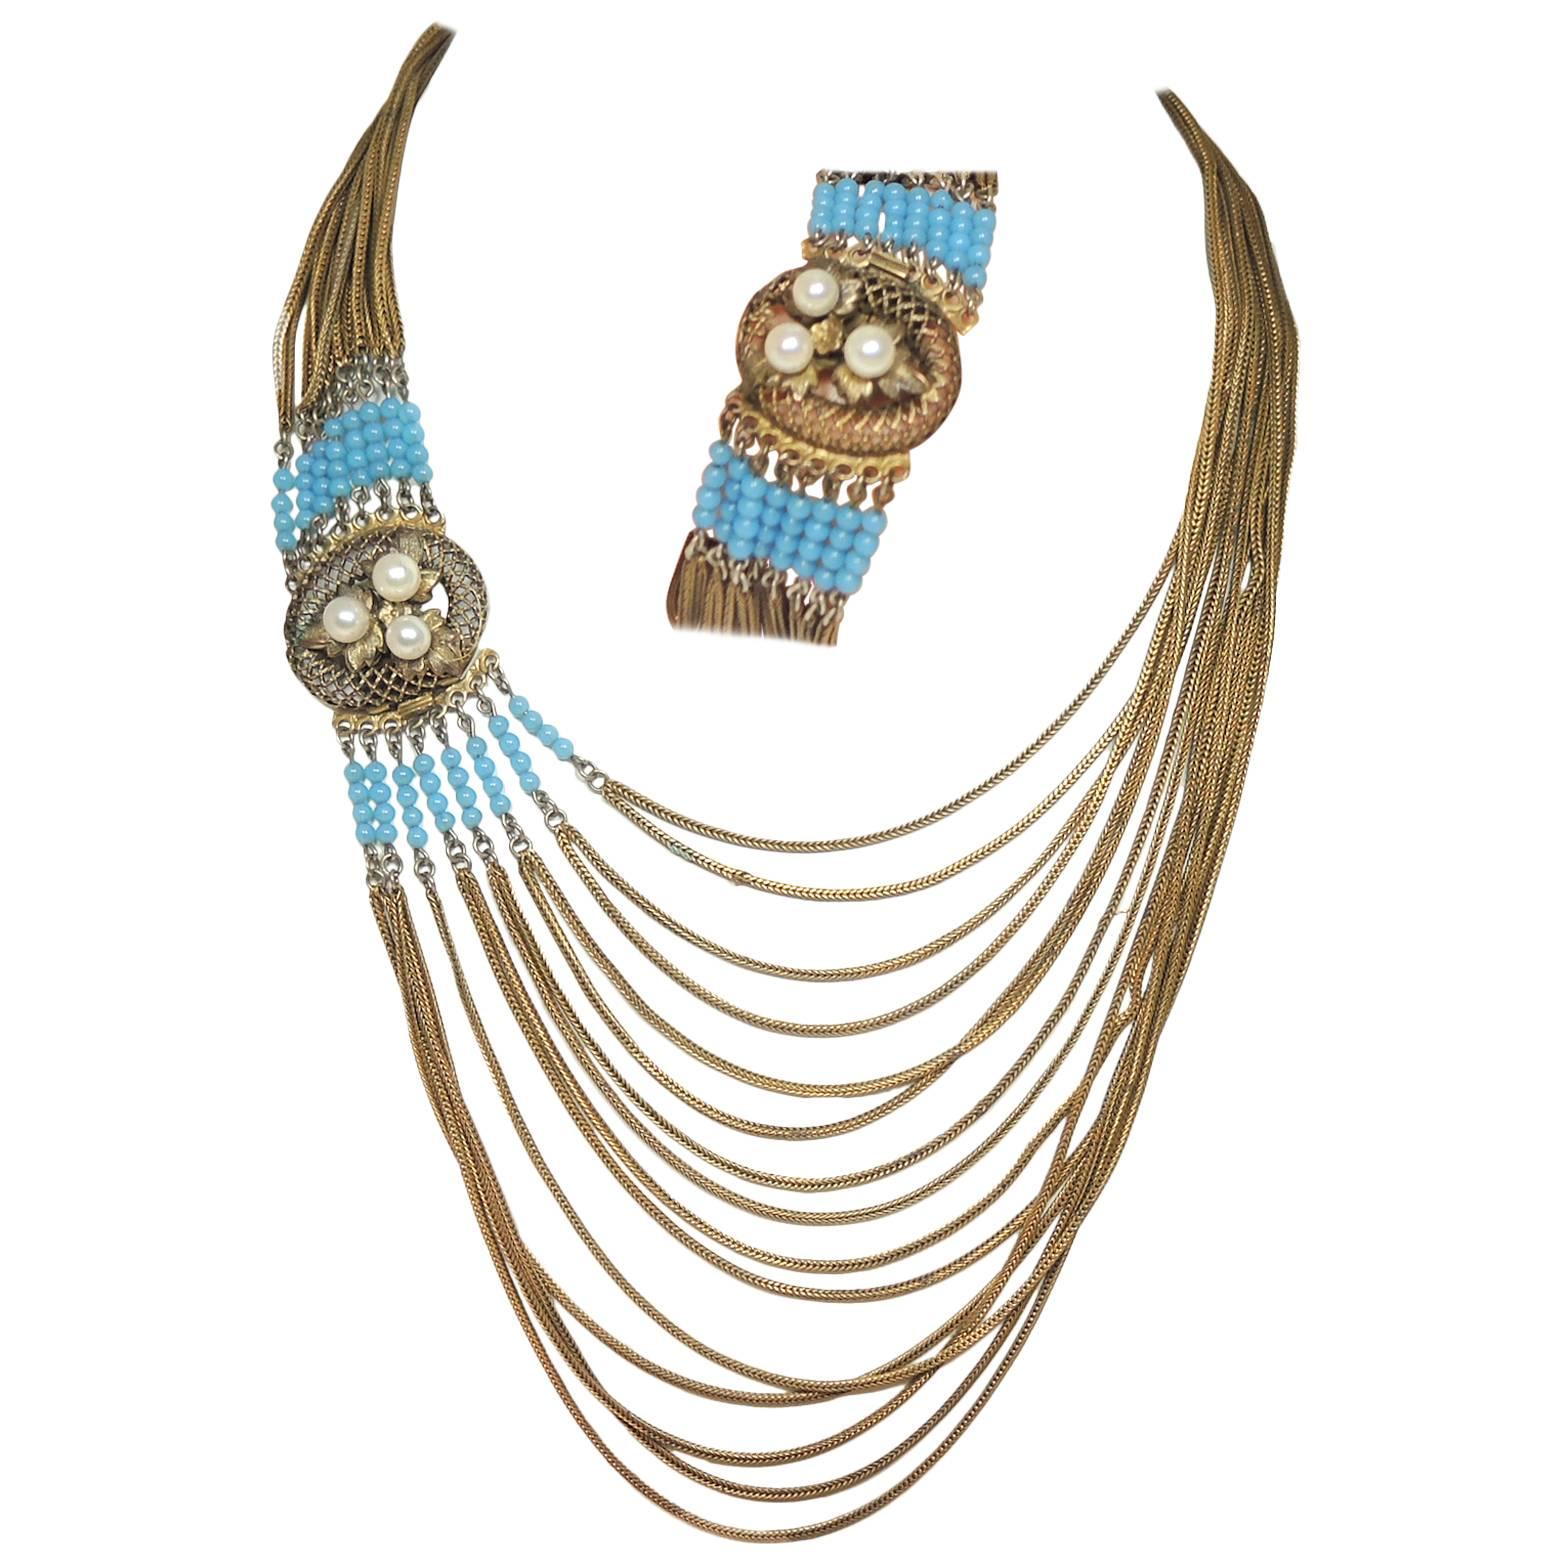 Victorian Fringed Faux Turquoise And Faux Pearl Necklace Set